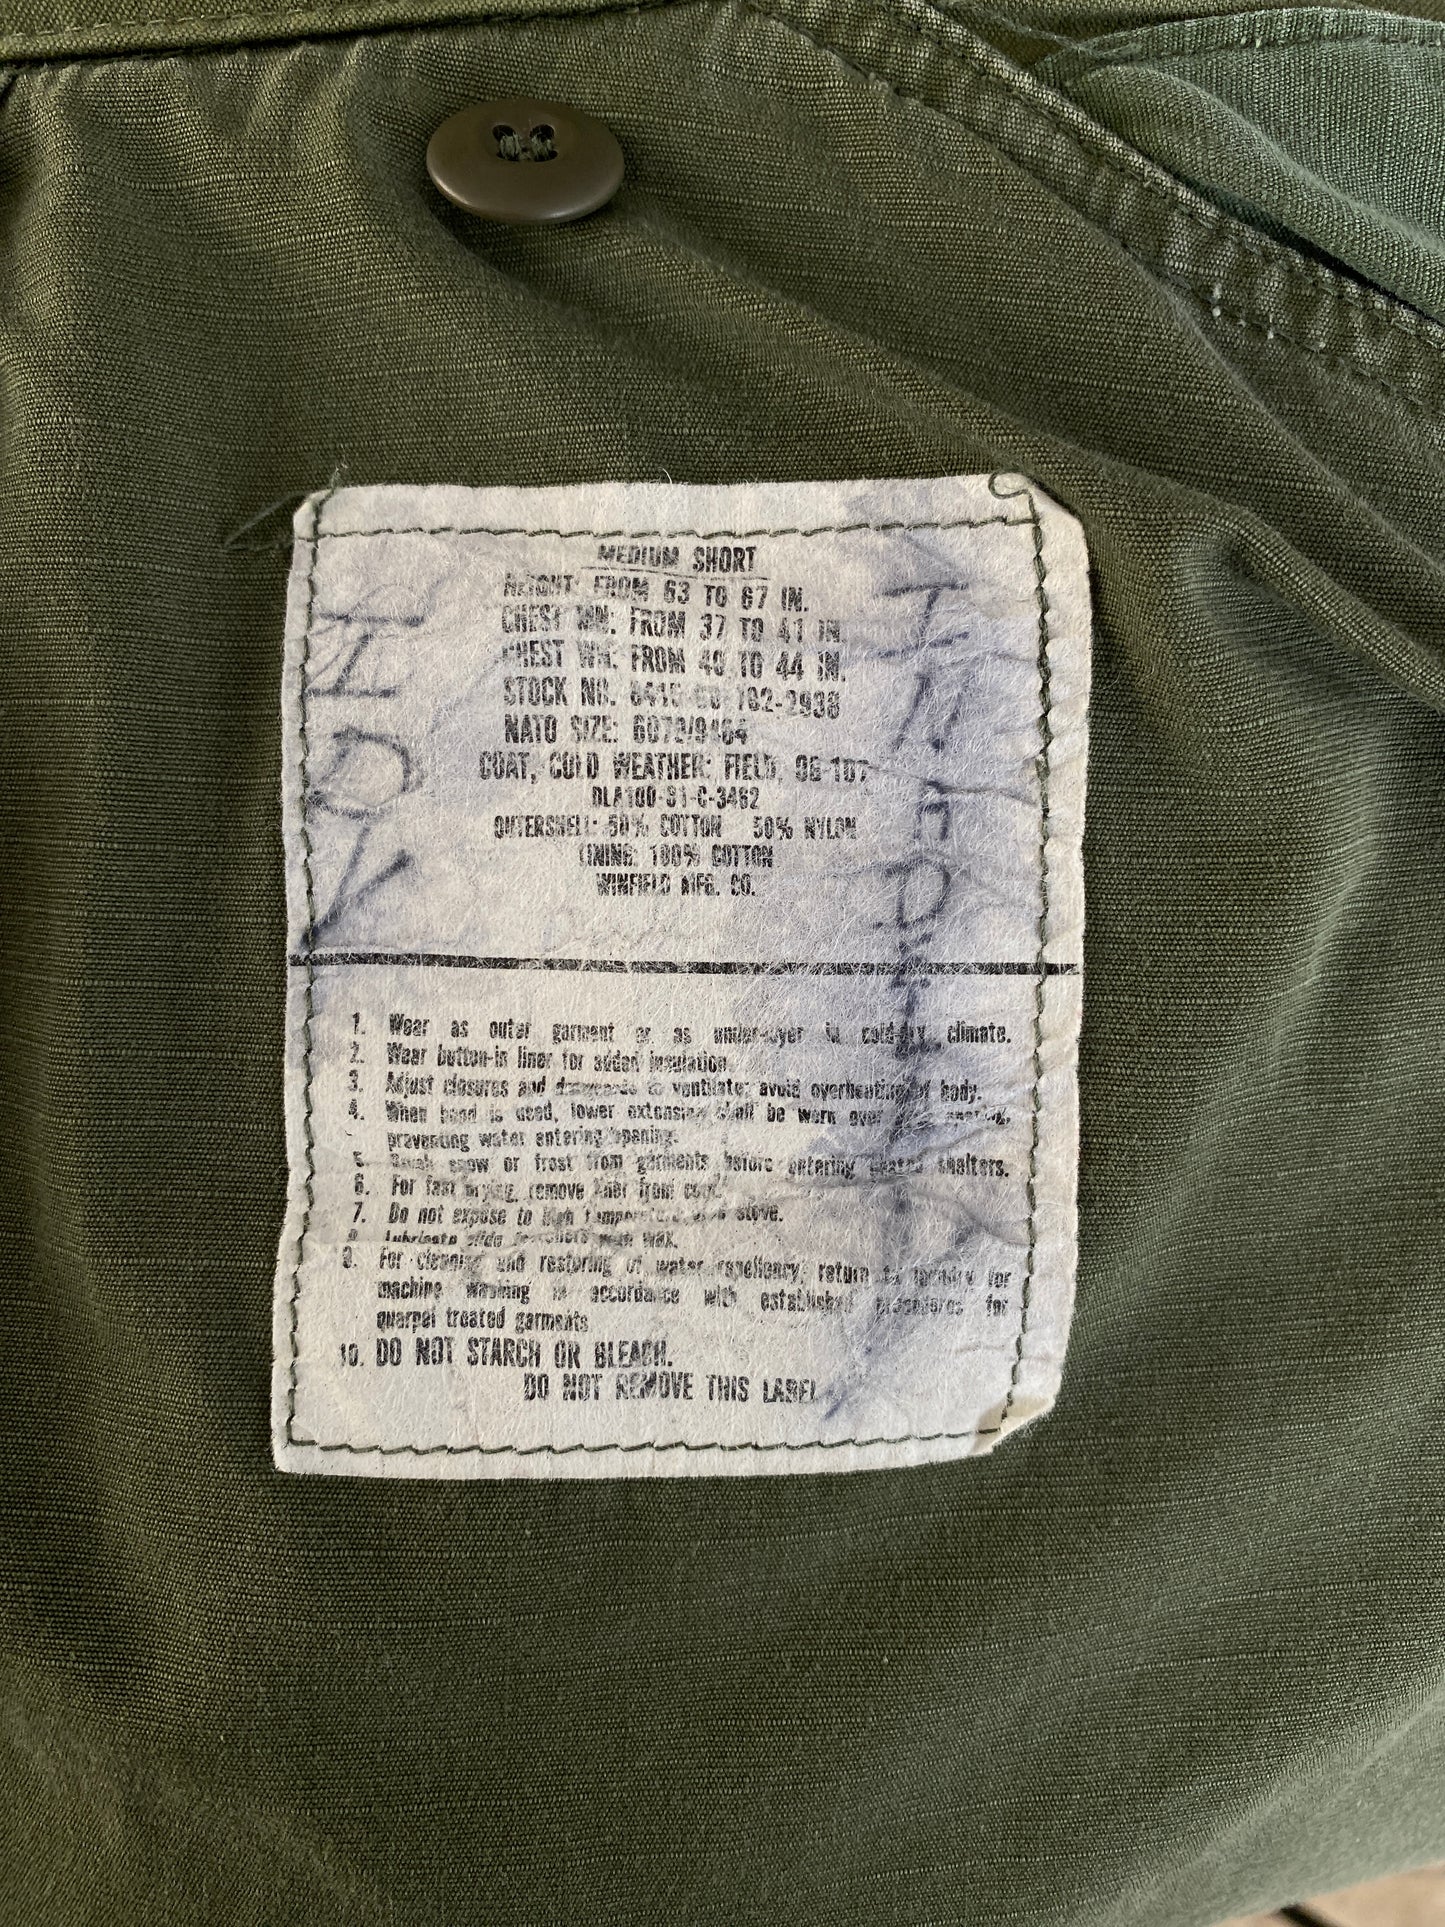 Med short . Authentic 1981 US Army M-65 field jacket. Military